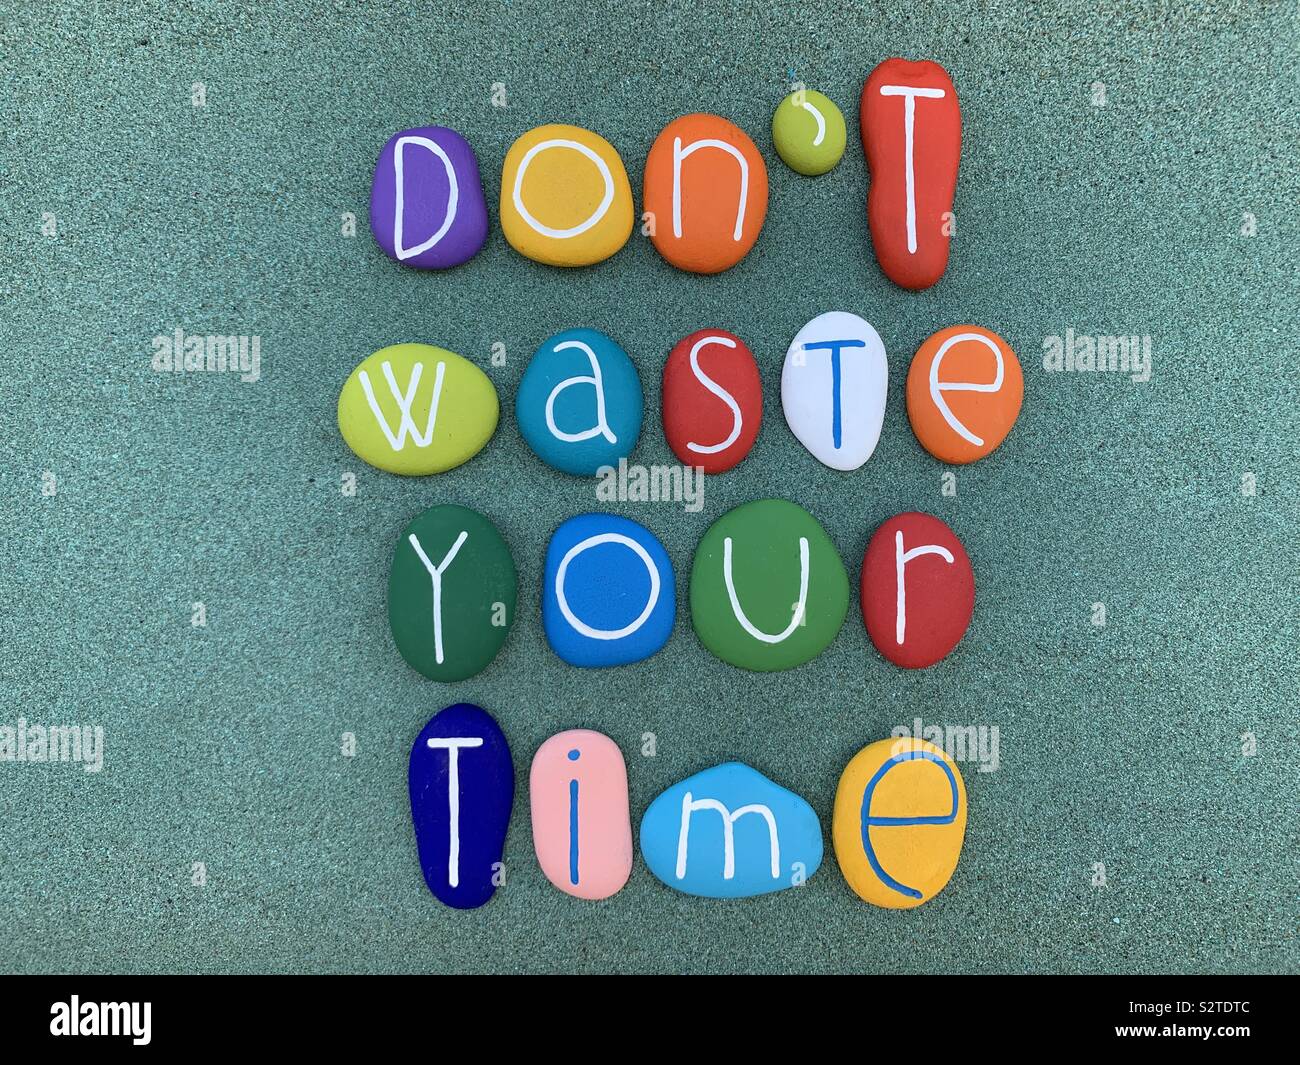 Don’t waste your time Stock Photo